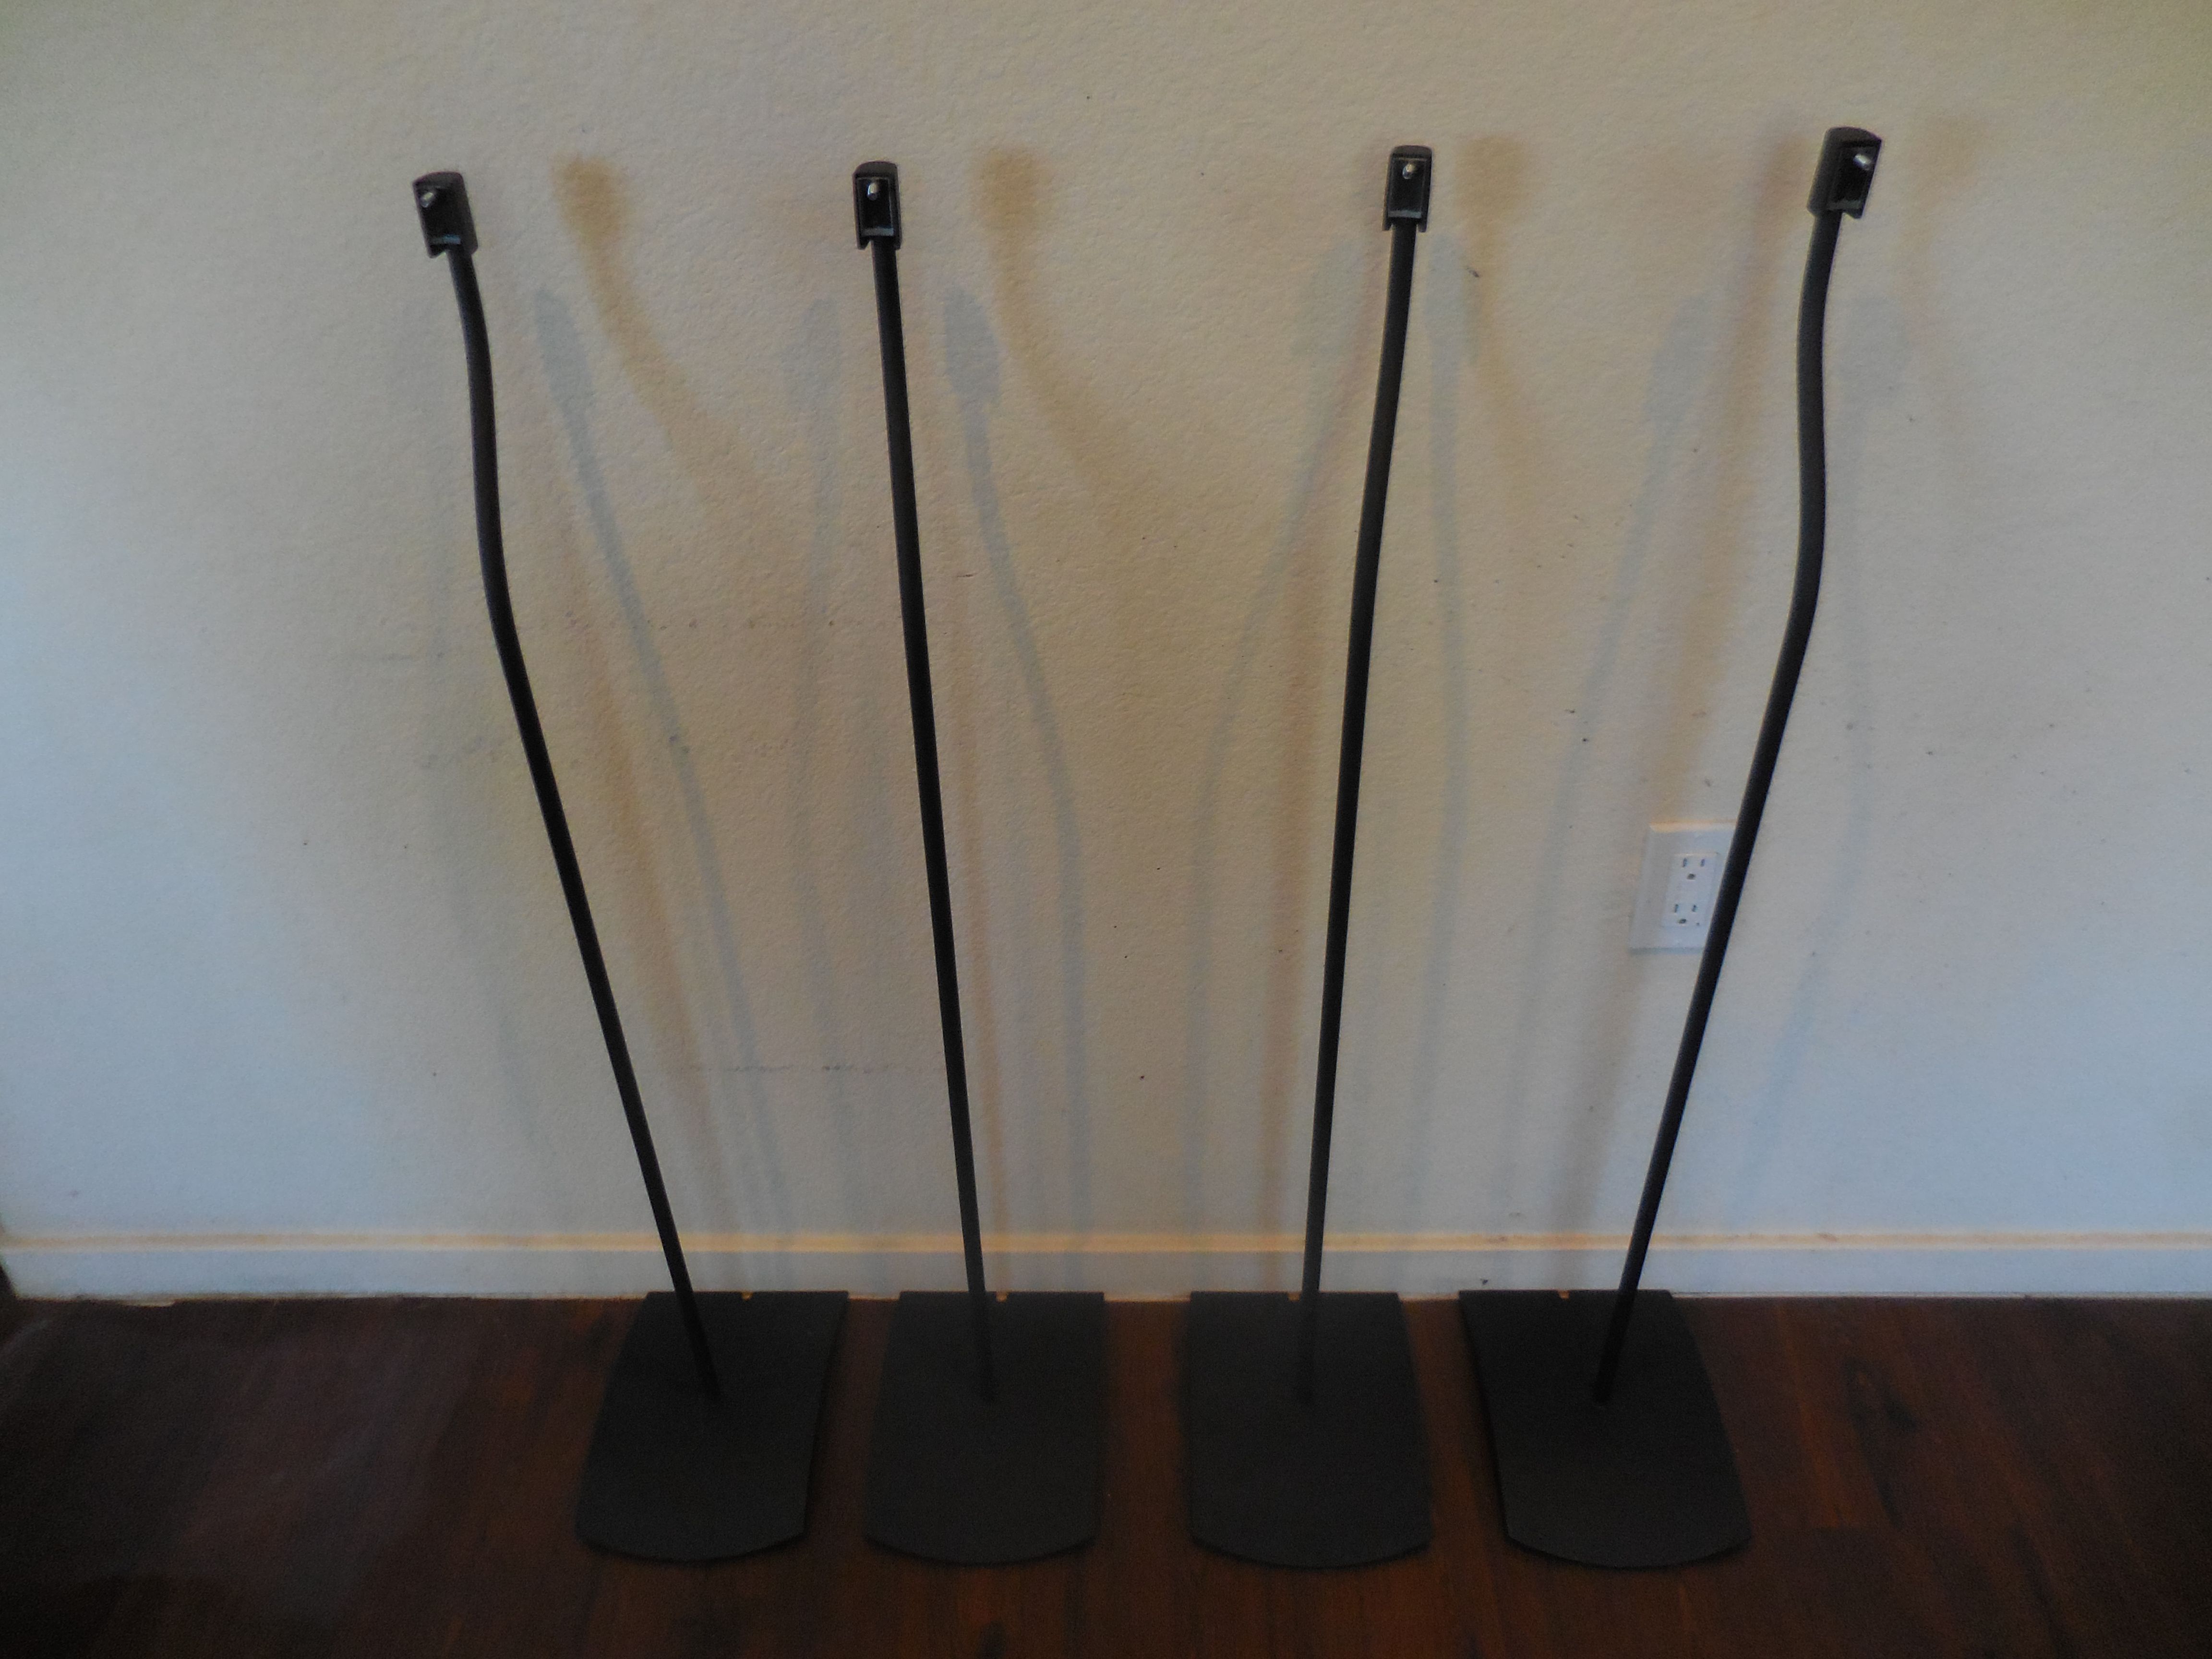 *2* BOSE UFS-20 DOUBLE JEWEL CUBE BLACK FLOOR SPEAKER STANDS LIFESTYLE 38 48. I HAVE OTHER LIFESTYLE 38 COMPONENTS. PRICE IS FOR 2 BUT 4 ARE AVAILABLE